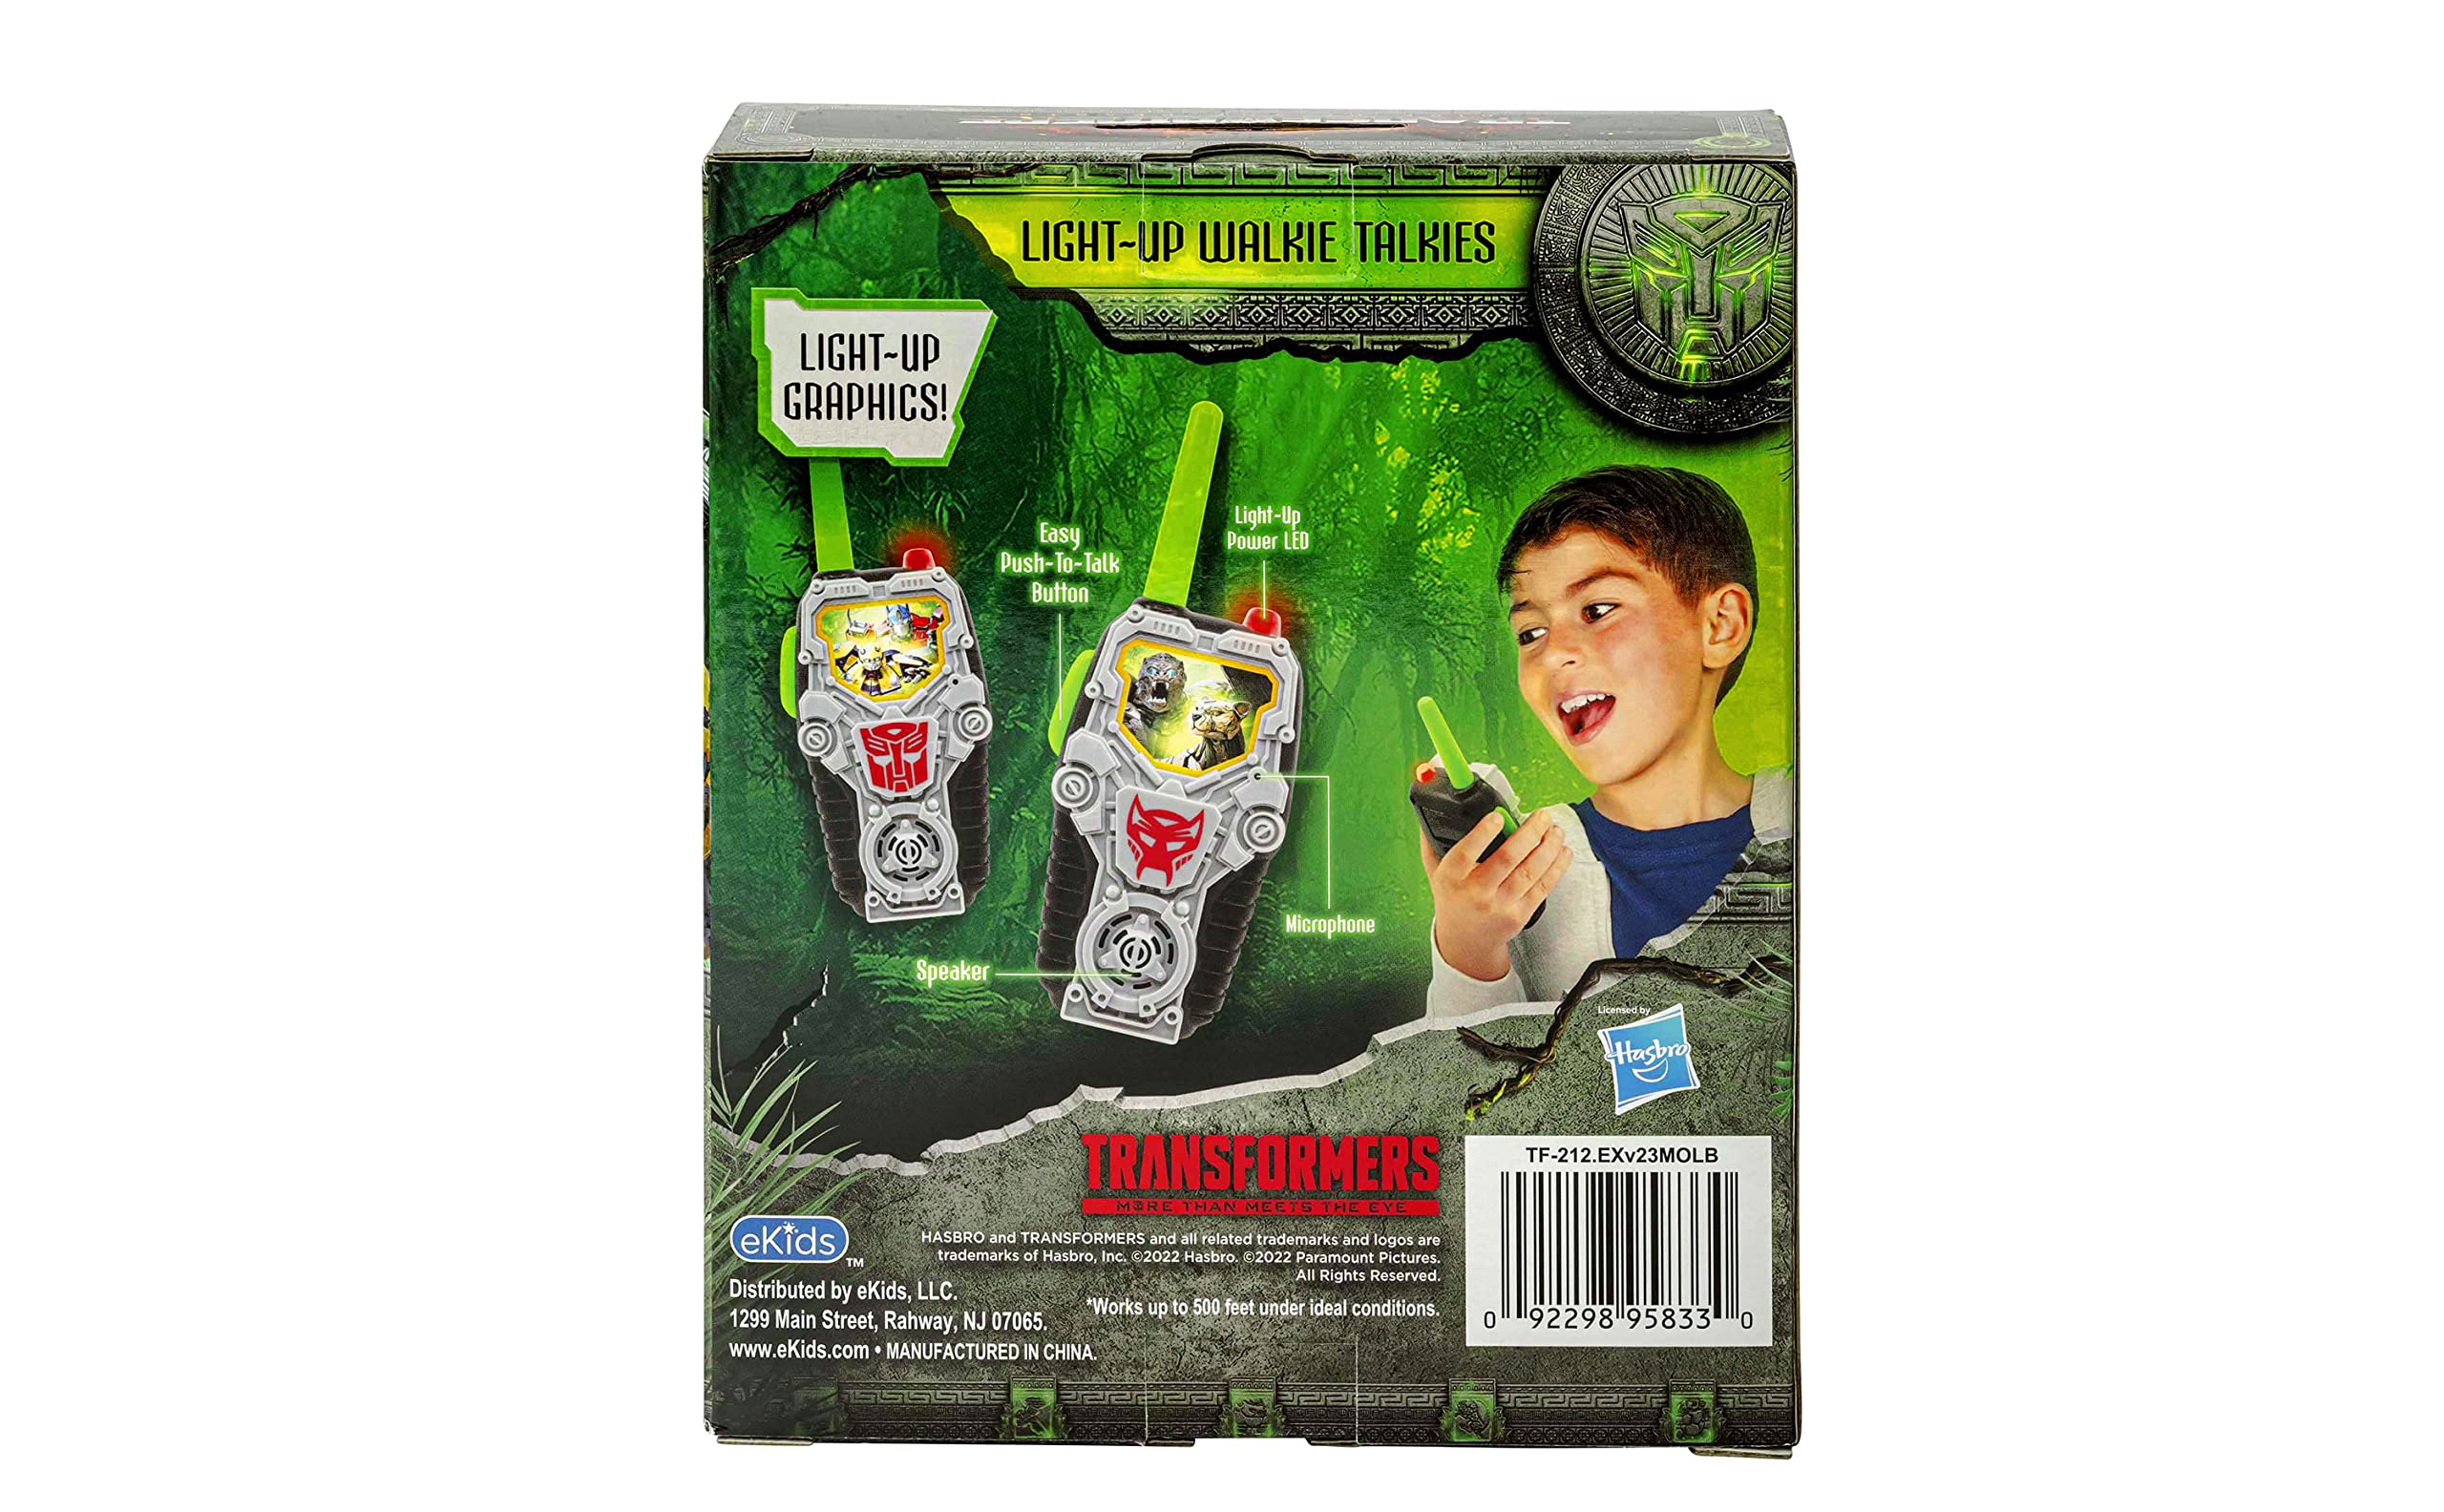 eKids Transformers Toy Walkie Talkies for Kids, Light-Up Indoor and Outdoor Toys for Kids and Fans of Transformers Toys